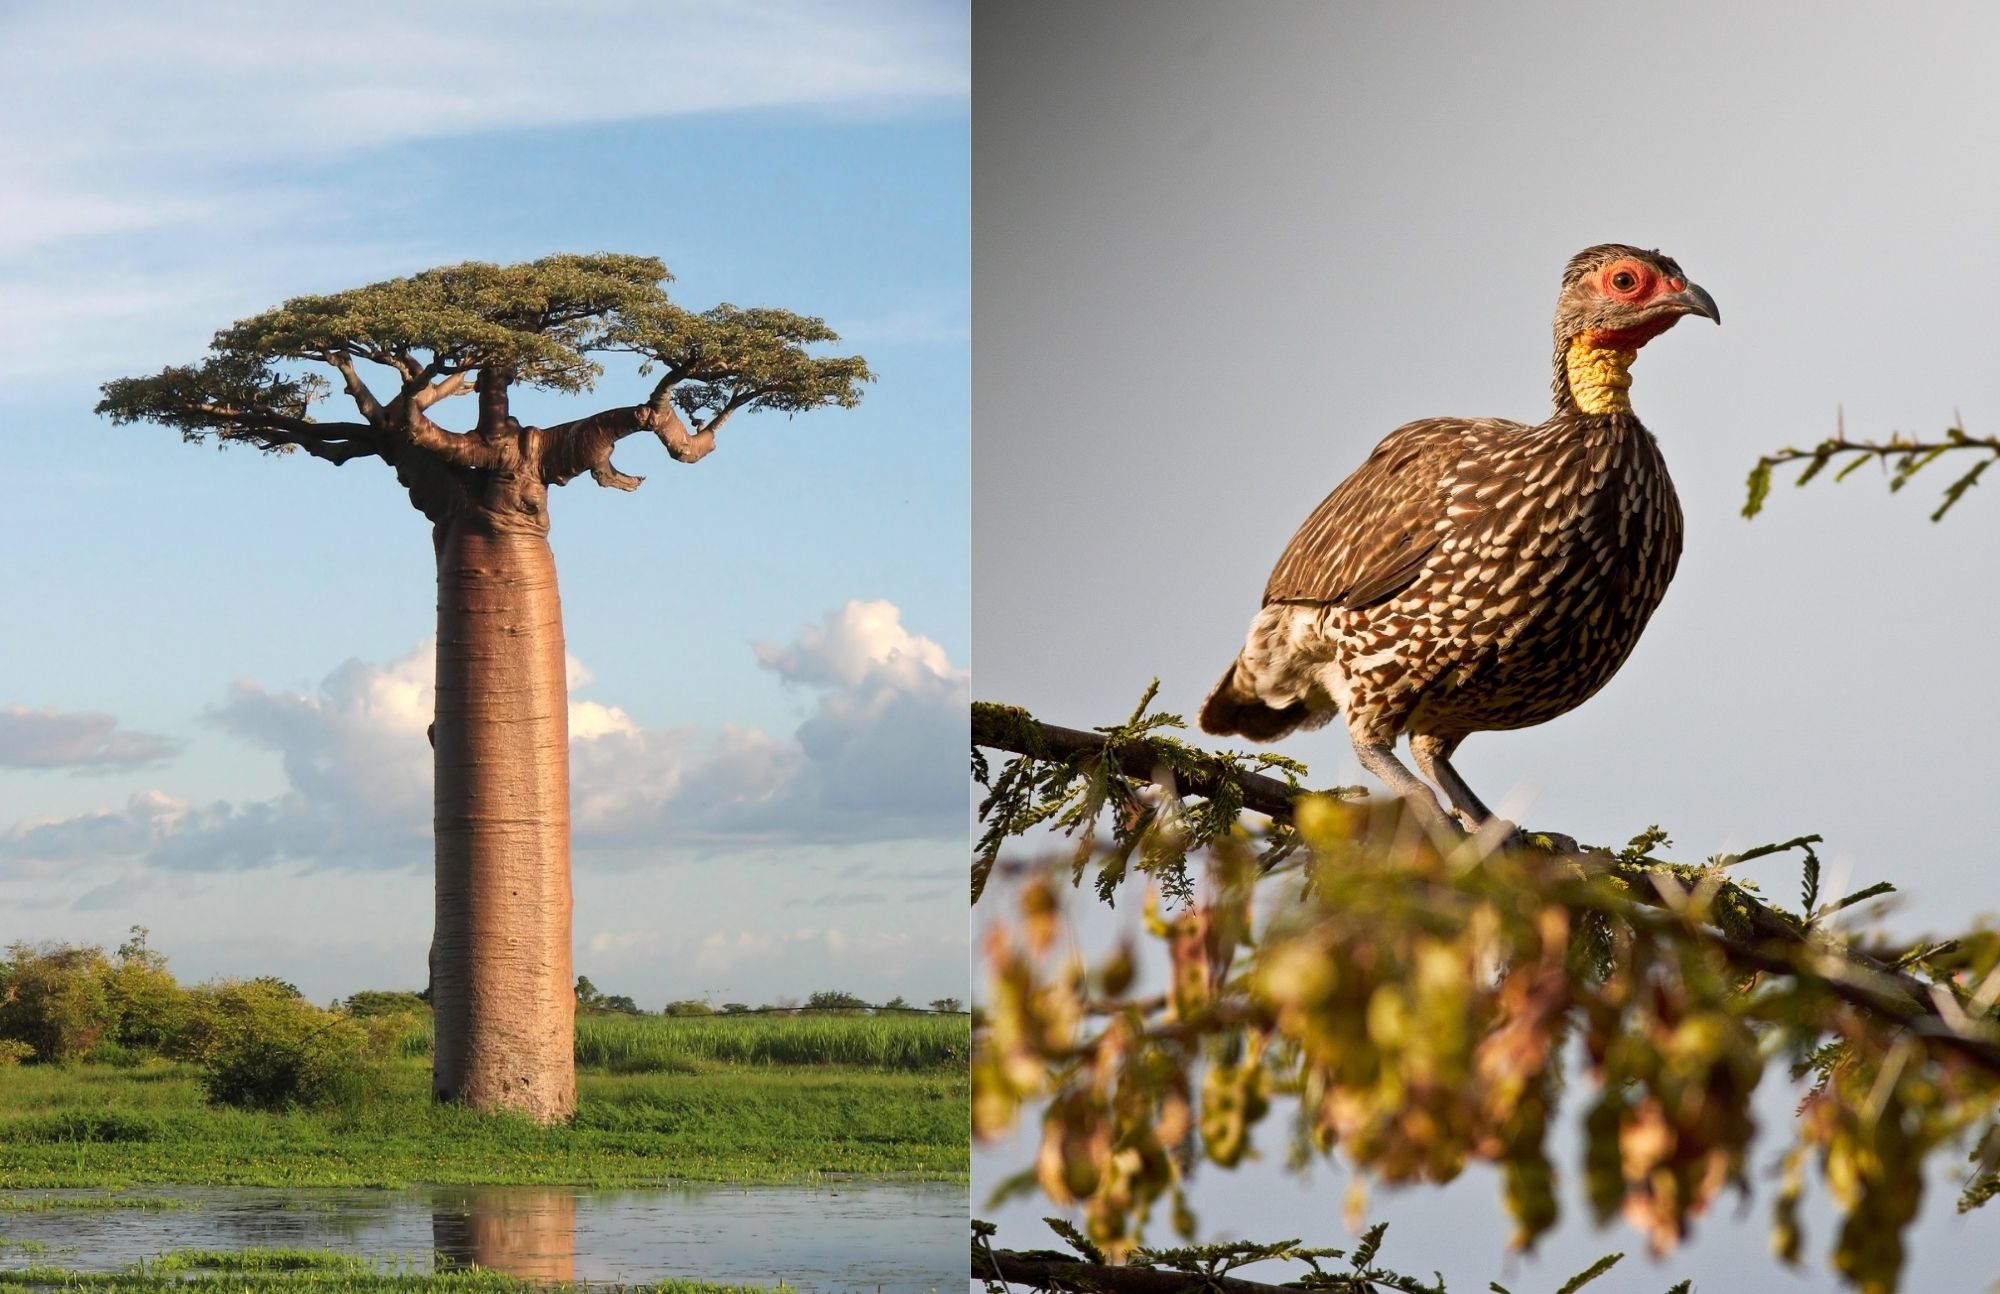 On the left, there are three Baobab tree, and on the right, a bird has landed on a tree branch